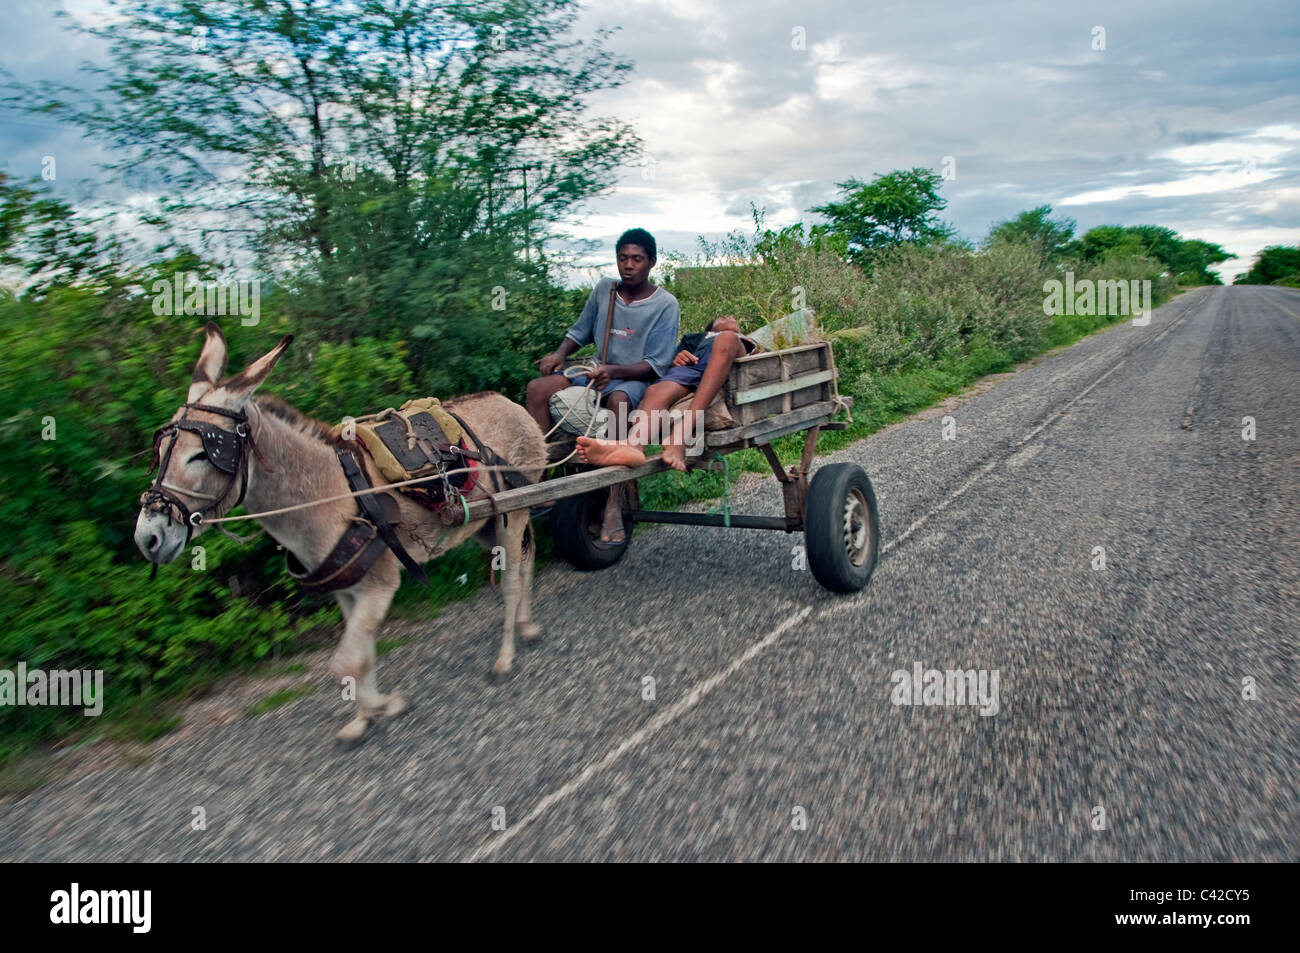 Two men riding in donkey cart in Northeast Brazil countryside Stock Photo